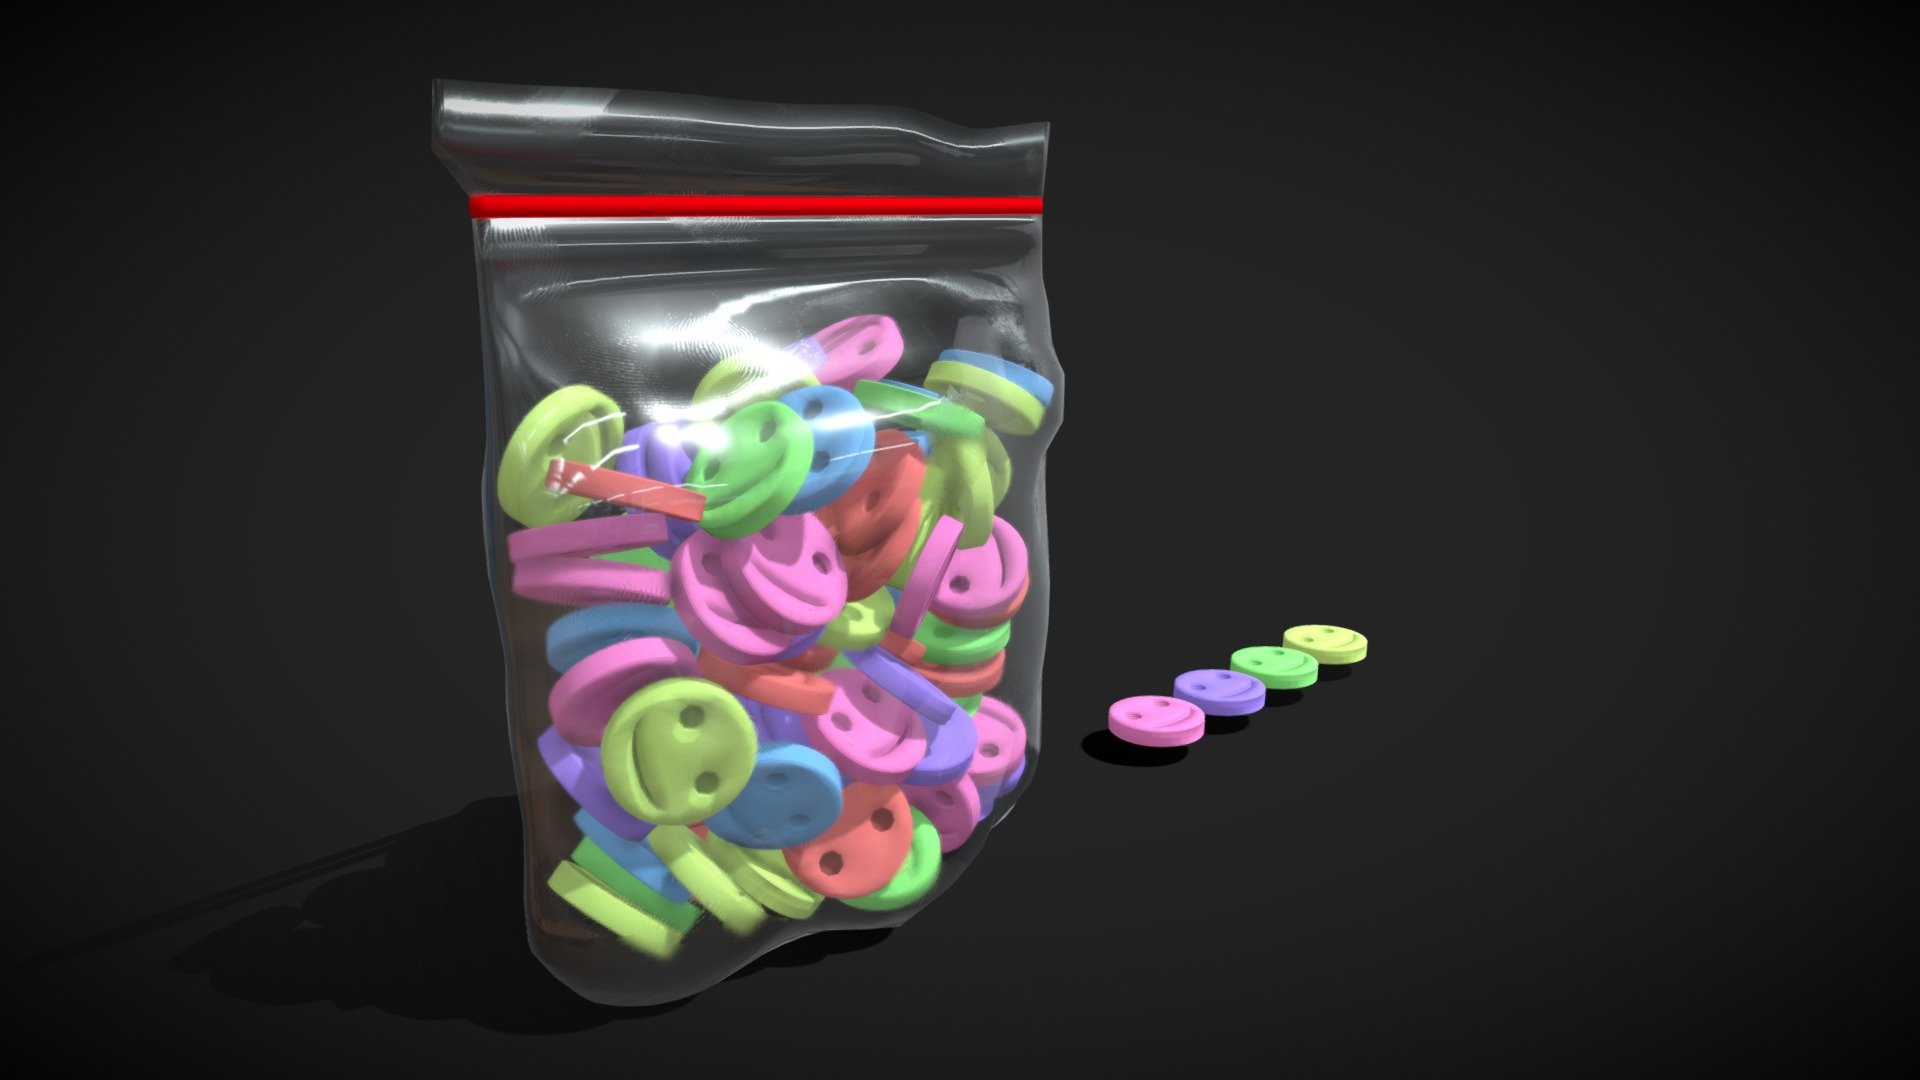 Version 2 of my Ecstasy bag and pills.
Low poly subdivision ready.
Perfectly optimised for VR/AR or game environment.
Made from scratch on blender.

All of my models are made with love for you to enjoy, cheers! - Small Ecstasy Bag and pills - Buy Royalty Free 3D model by DGNS (@GuillaumeDGNS) 3d model